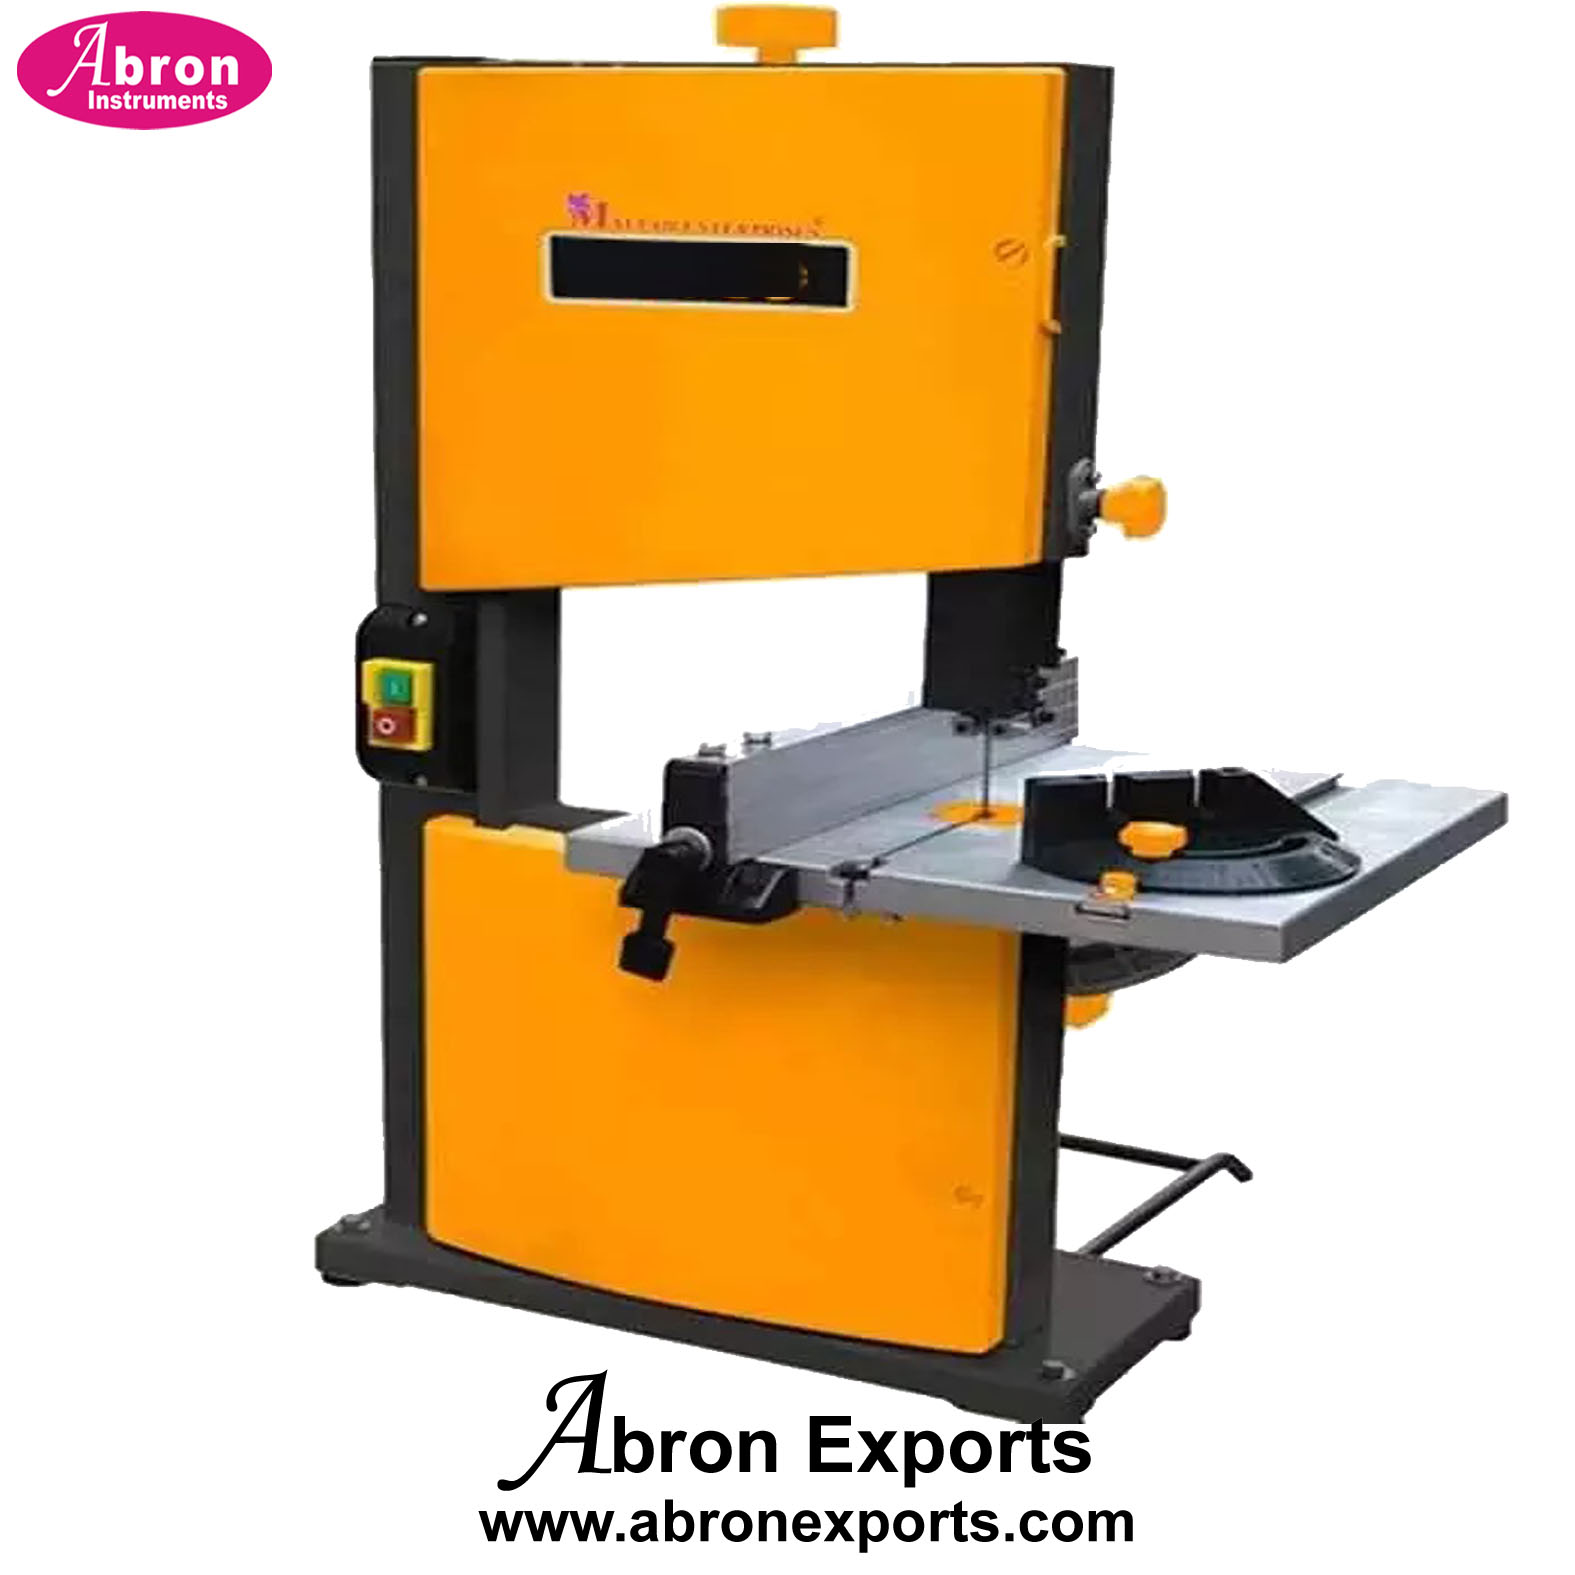 Orthopedic band saw for sectioning body and limbs electric box 80cm abron ABM-3101-BS1